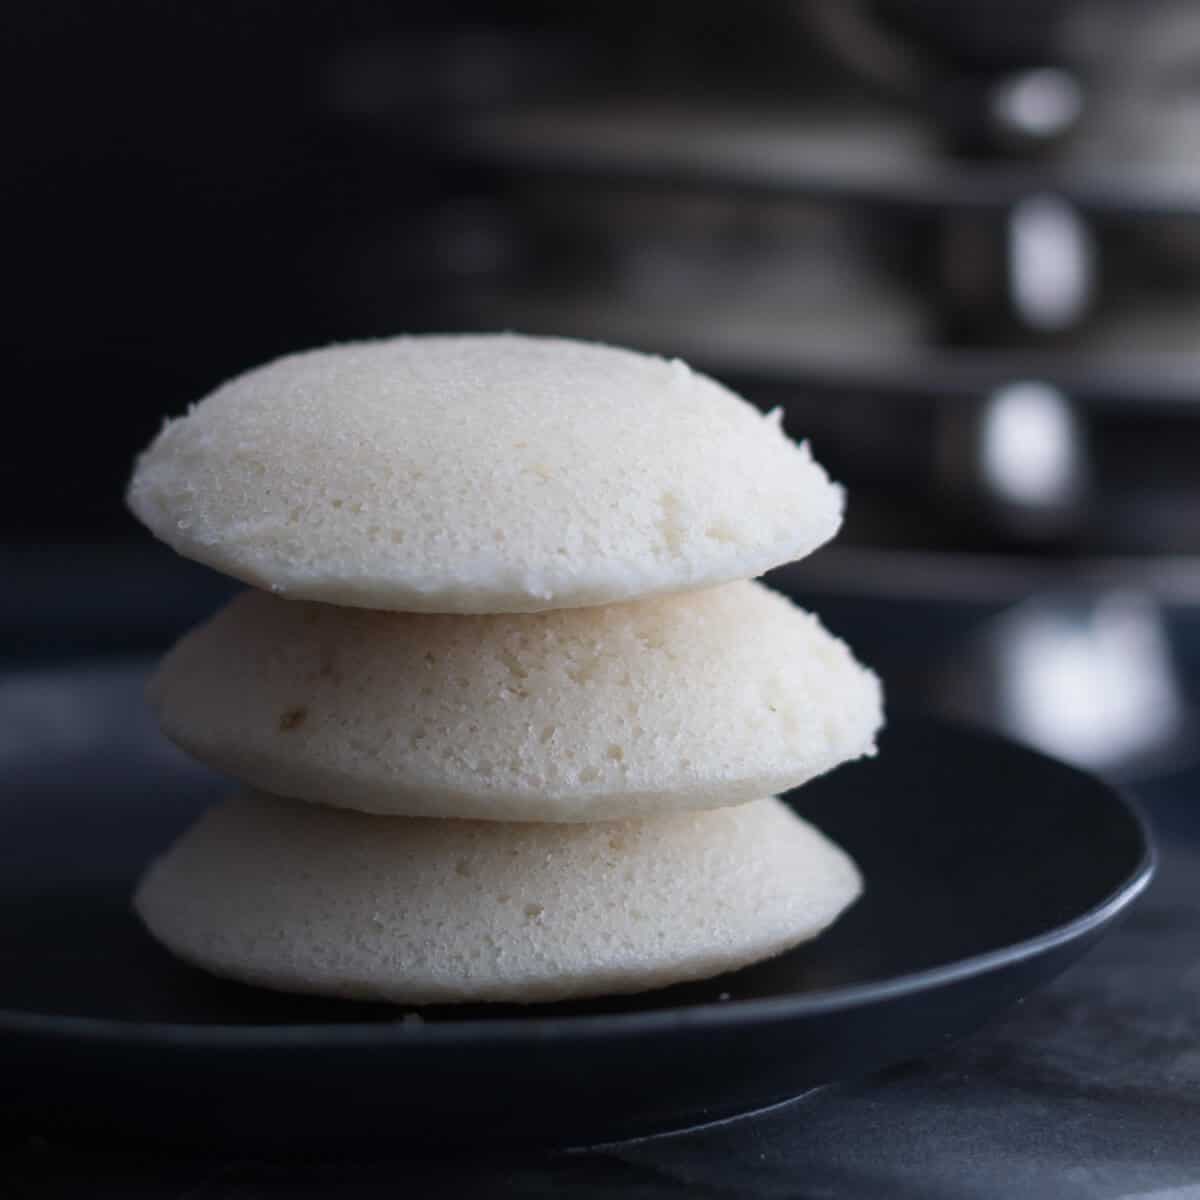 A stack of 3 spongy idlis kept on a black plate